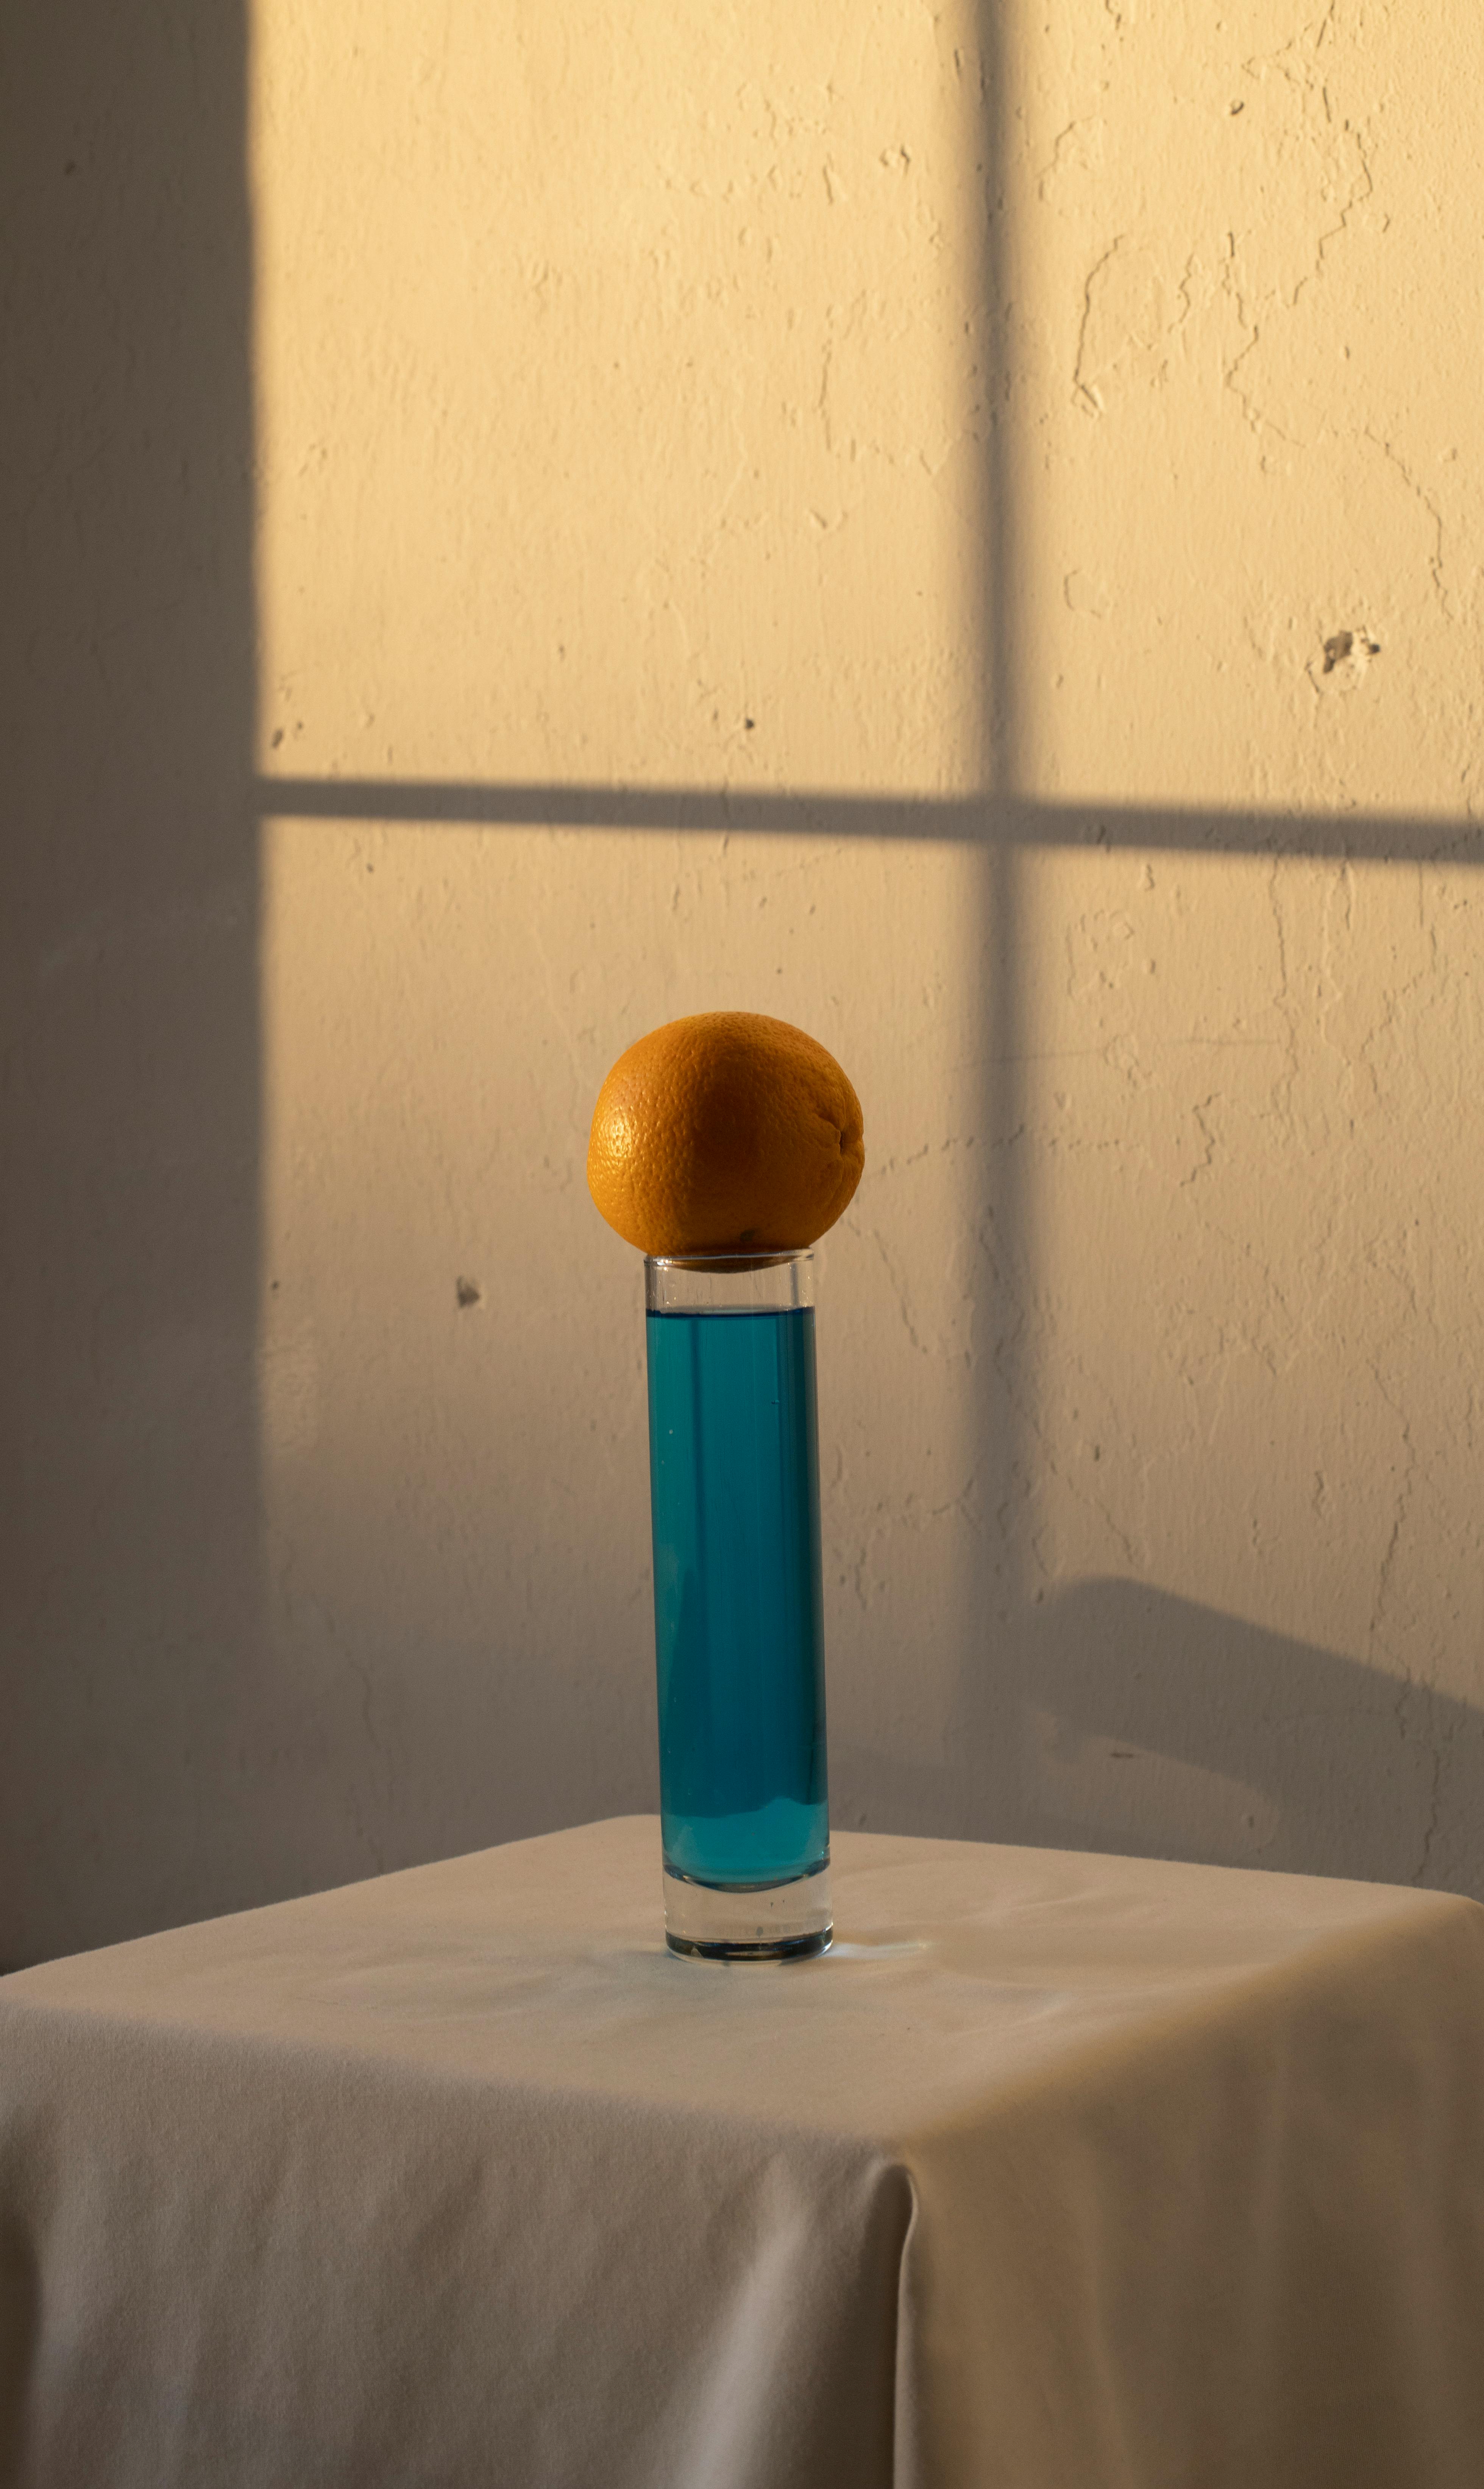 orange placed above glass with blue drink